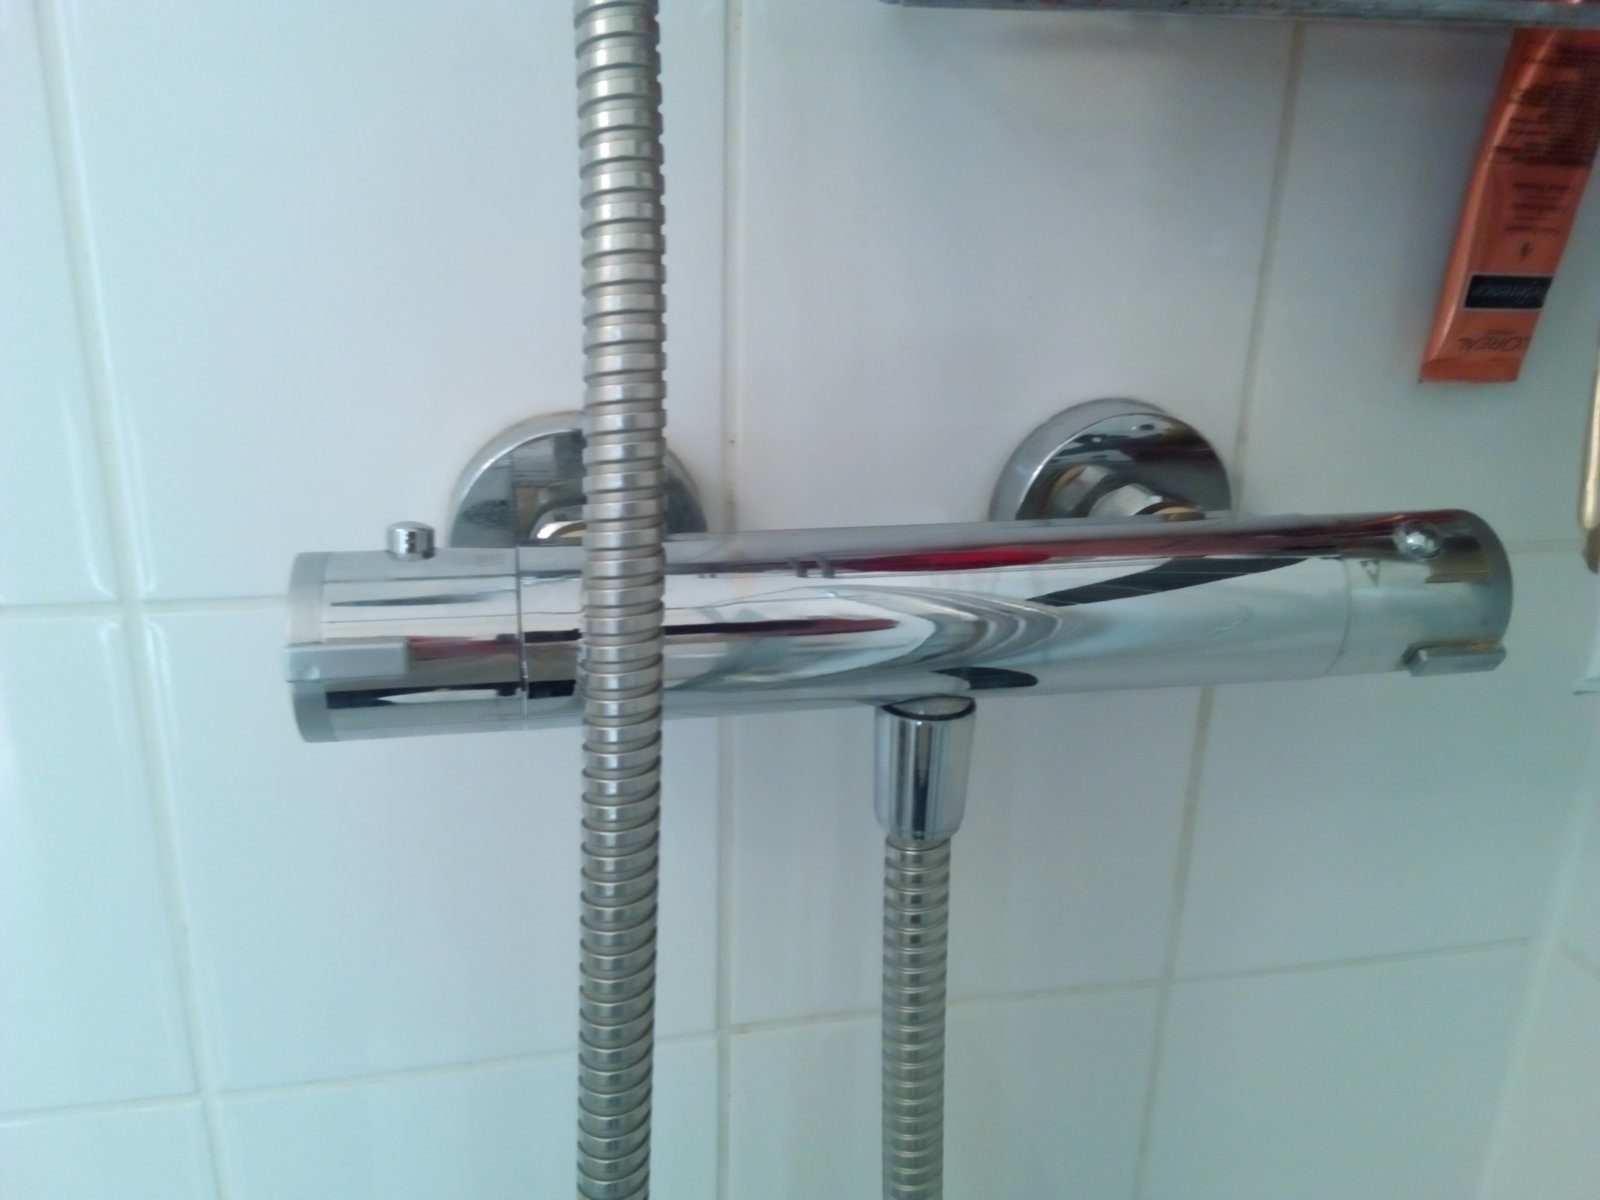 Dripping Abs Shower Bar Repair Or Replace Diynot Forums